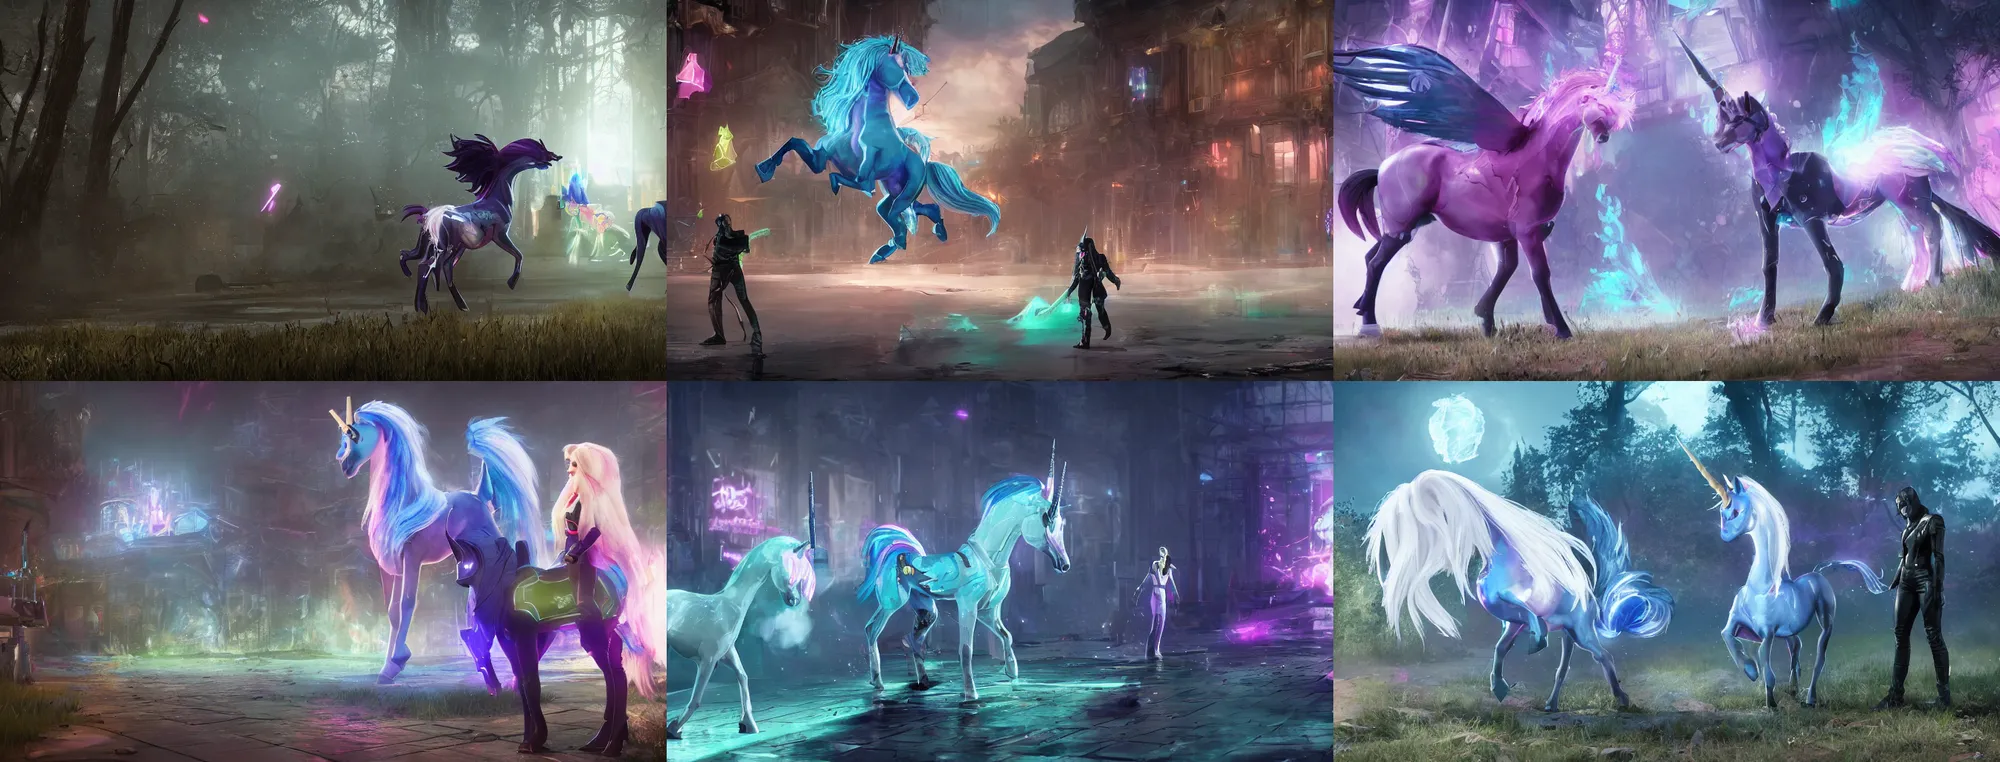 Prompt: Phantom Dust gameplay screenshot, with two unicorns from my little pony, Unreal Engine 5 (2022) by Ismail Inceoglu